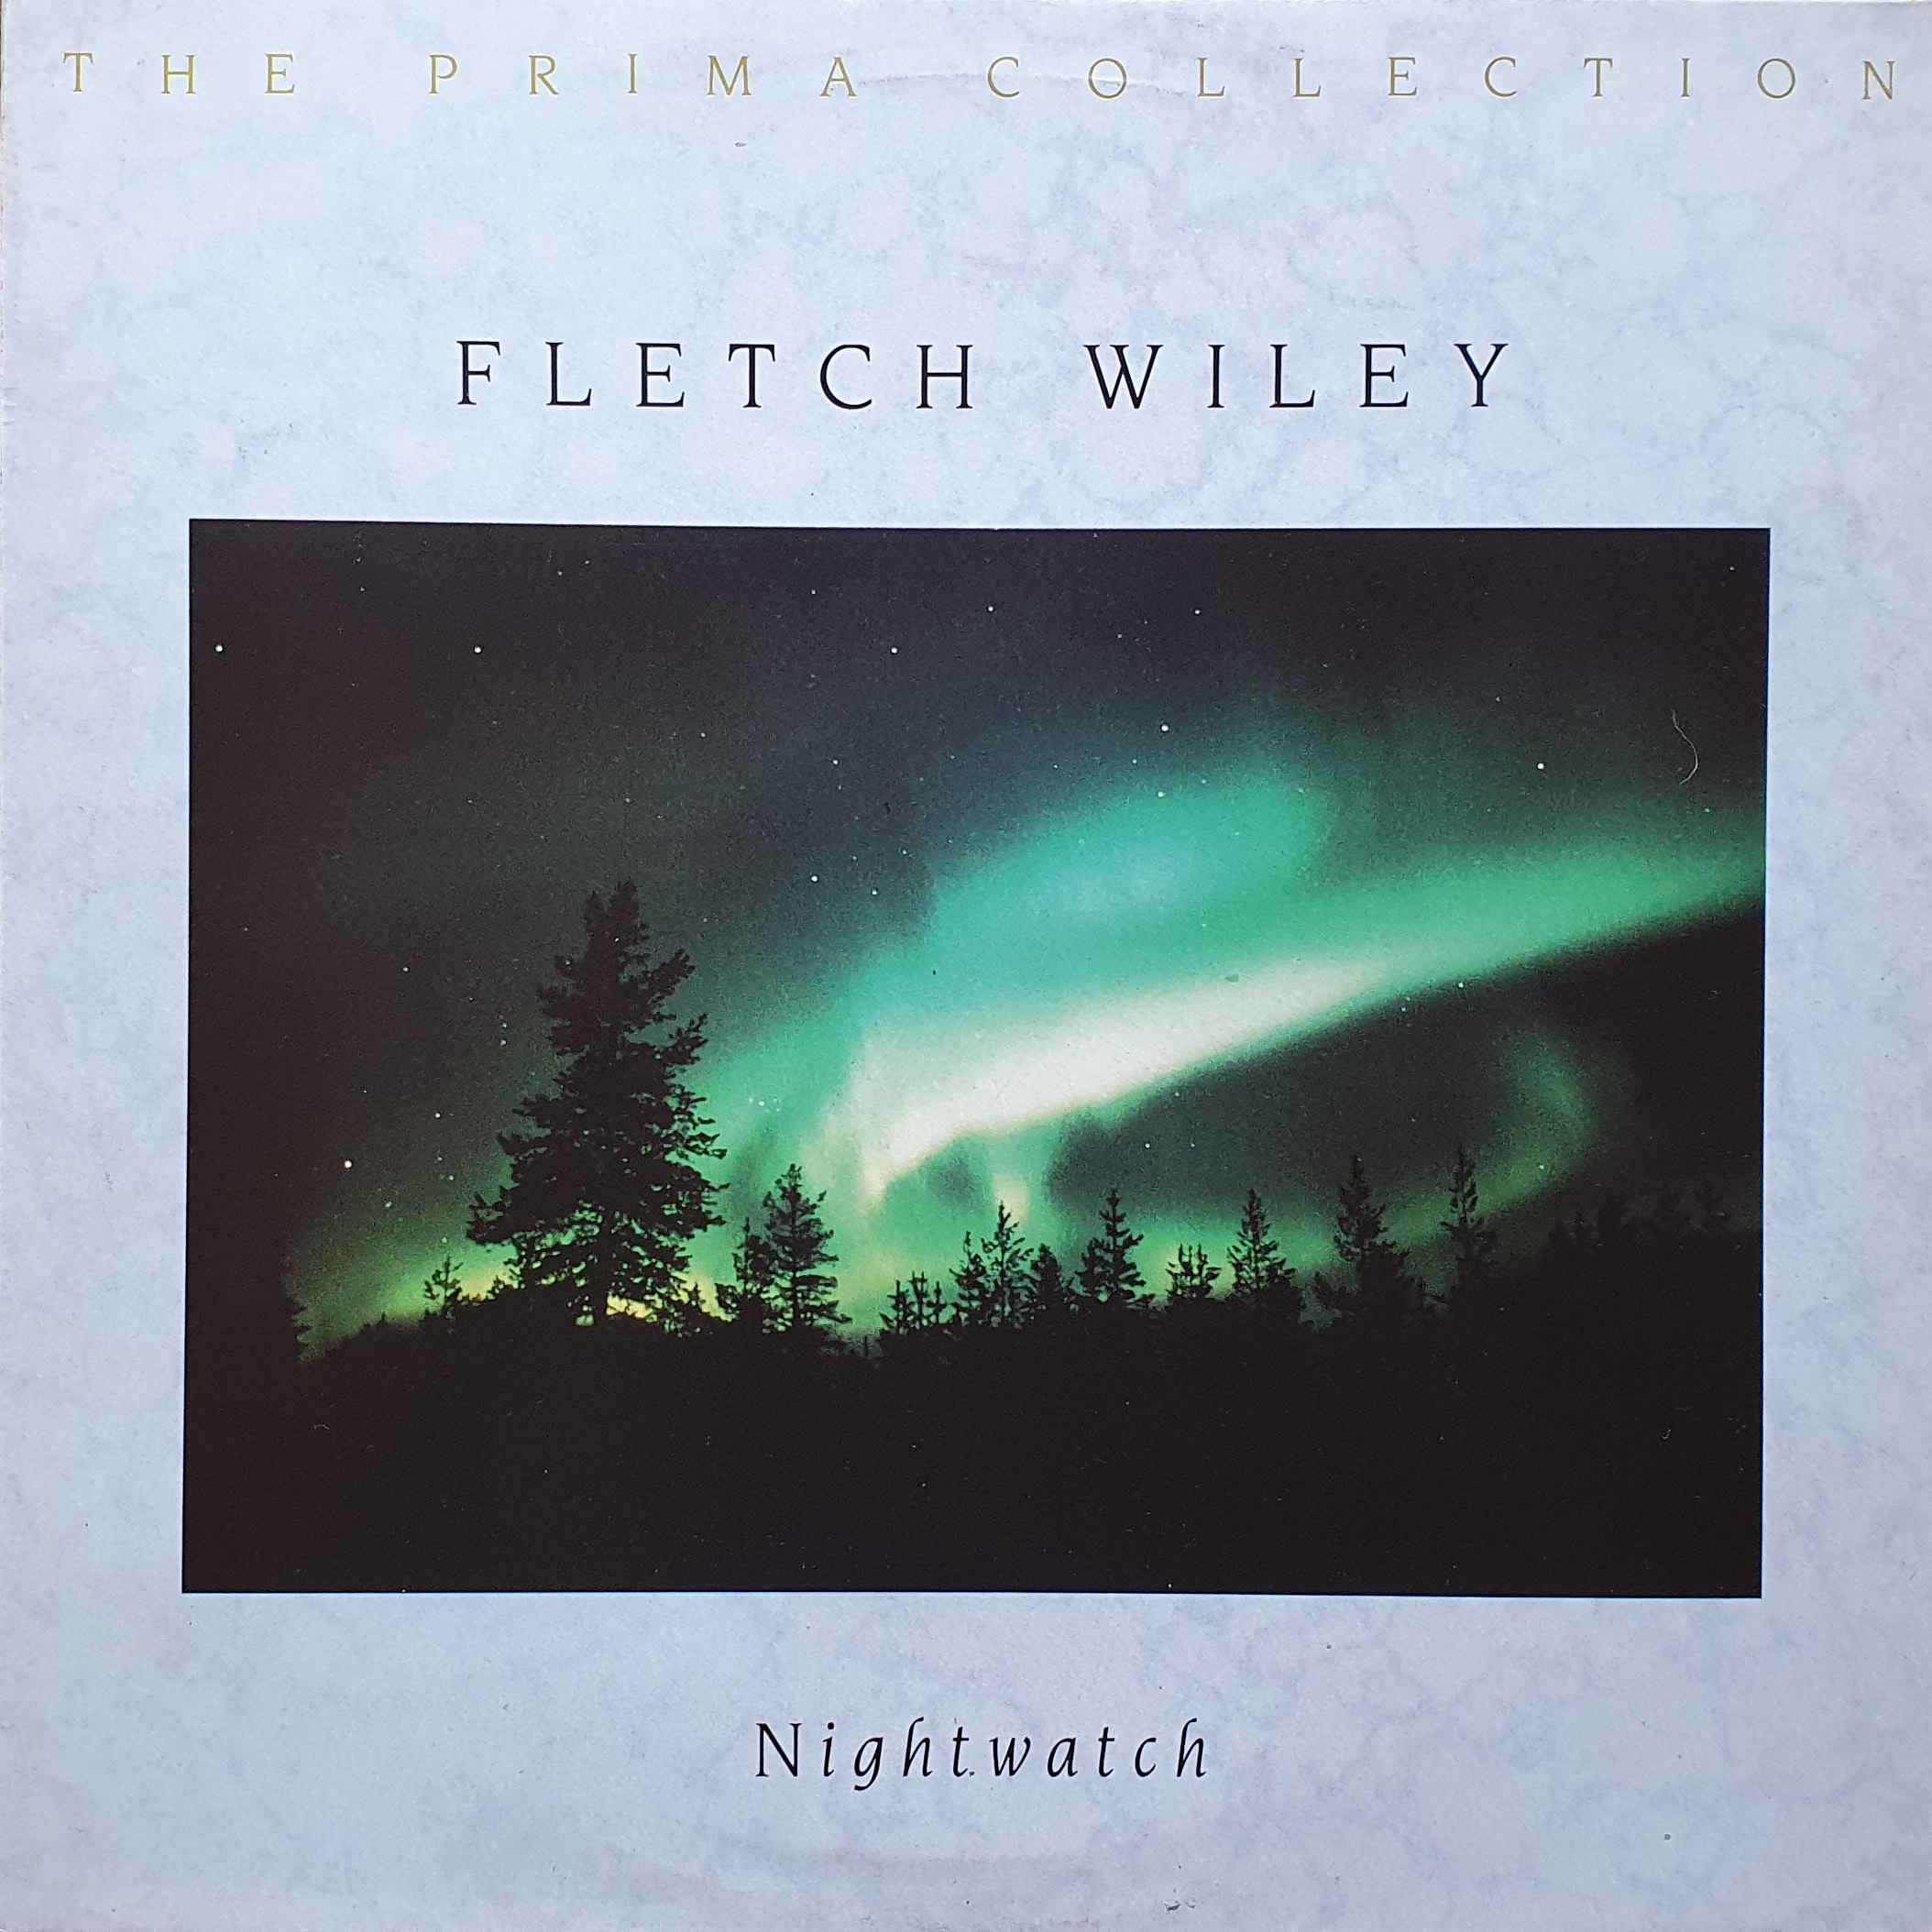 Picture of Night watch by artist Fletch Wiley from the BBC albums - Records and Tapes library